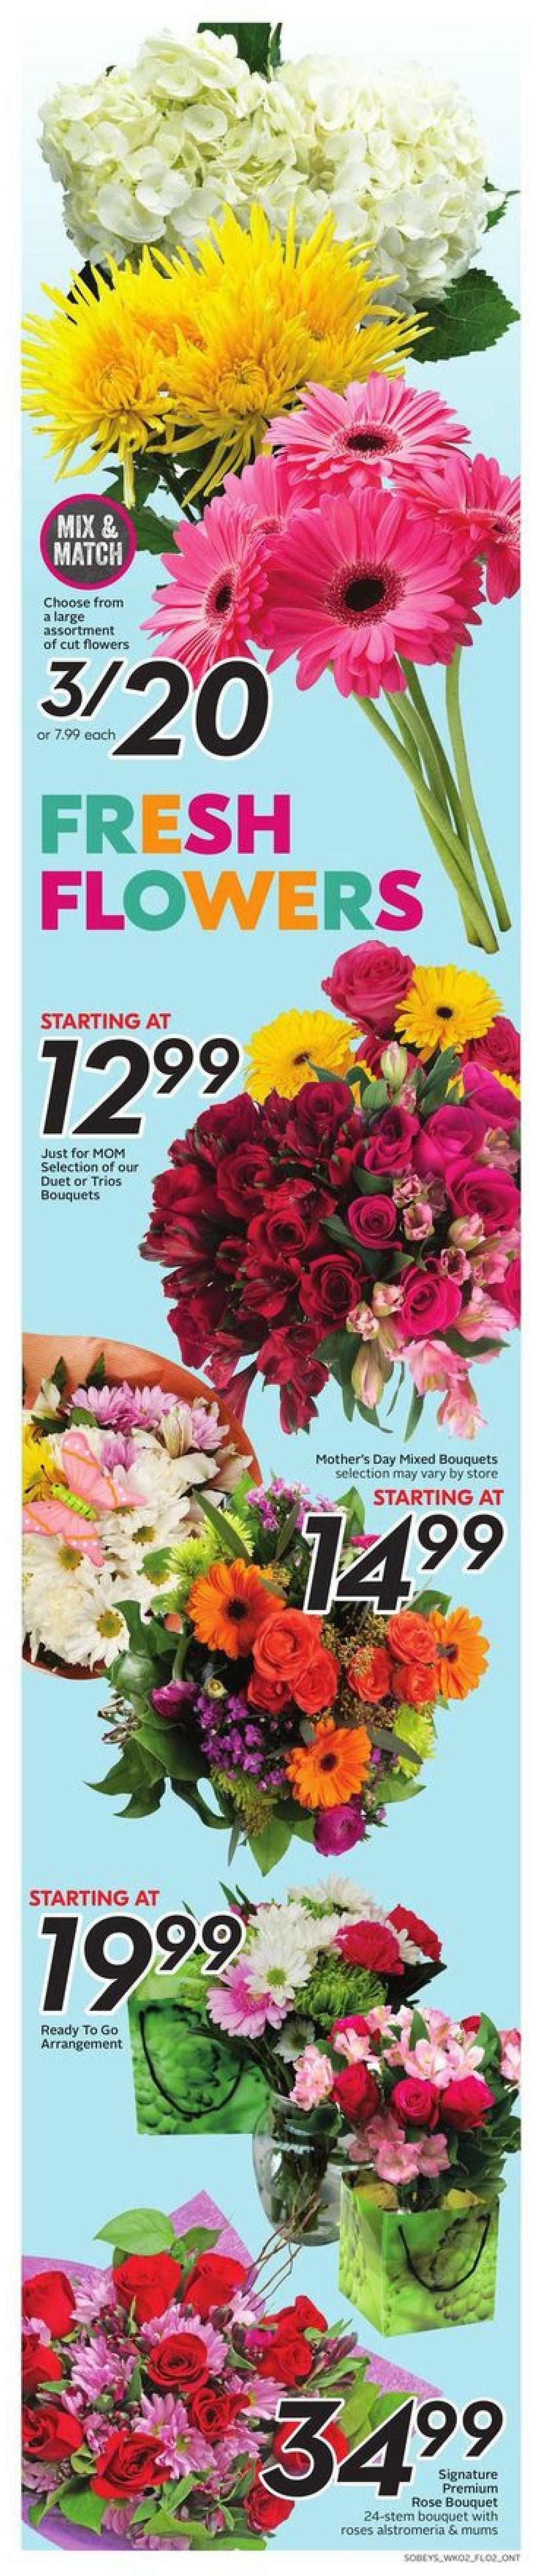 Sobeys Flyer from May 6